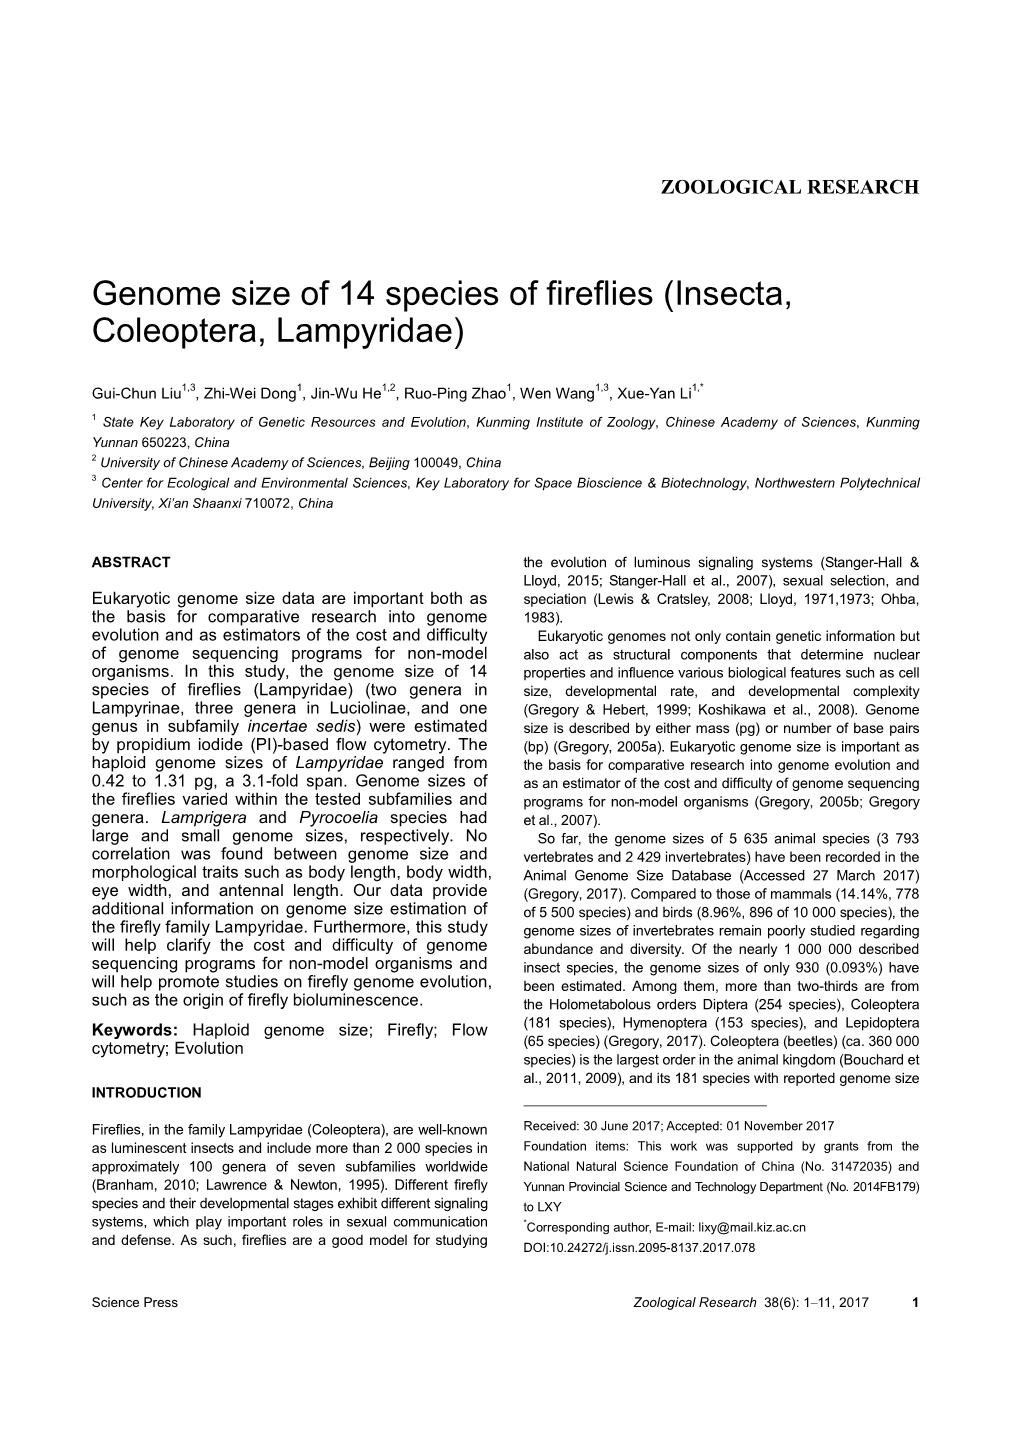 Genome Size of 14 Species of Fireflies (Insecta, Coleoptera, Lampyridae)